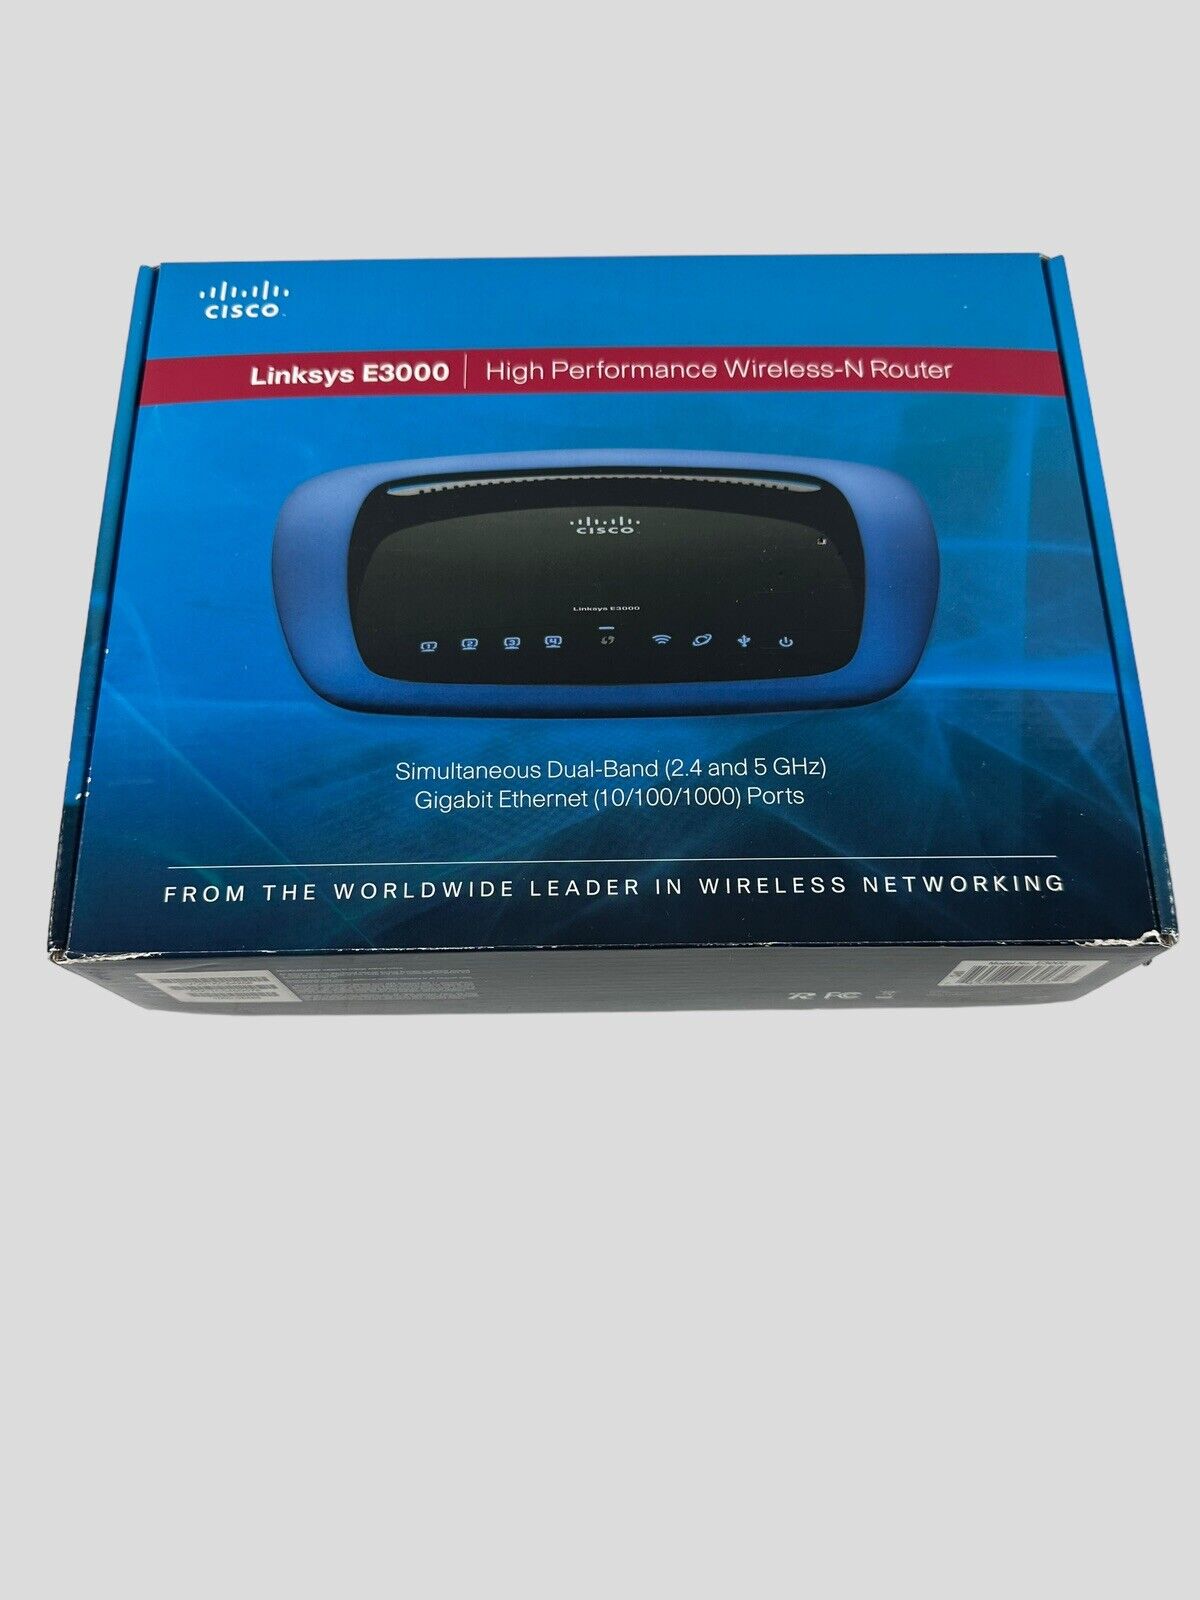 CISCO Linksys E3000 High Performance Wireless-N Dual-Band Router 2.4 & 5 GHz